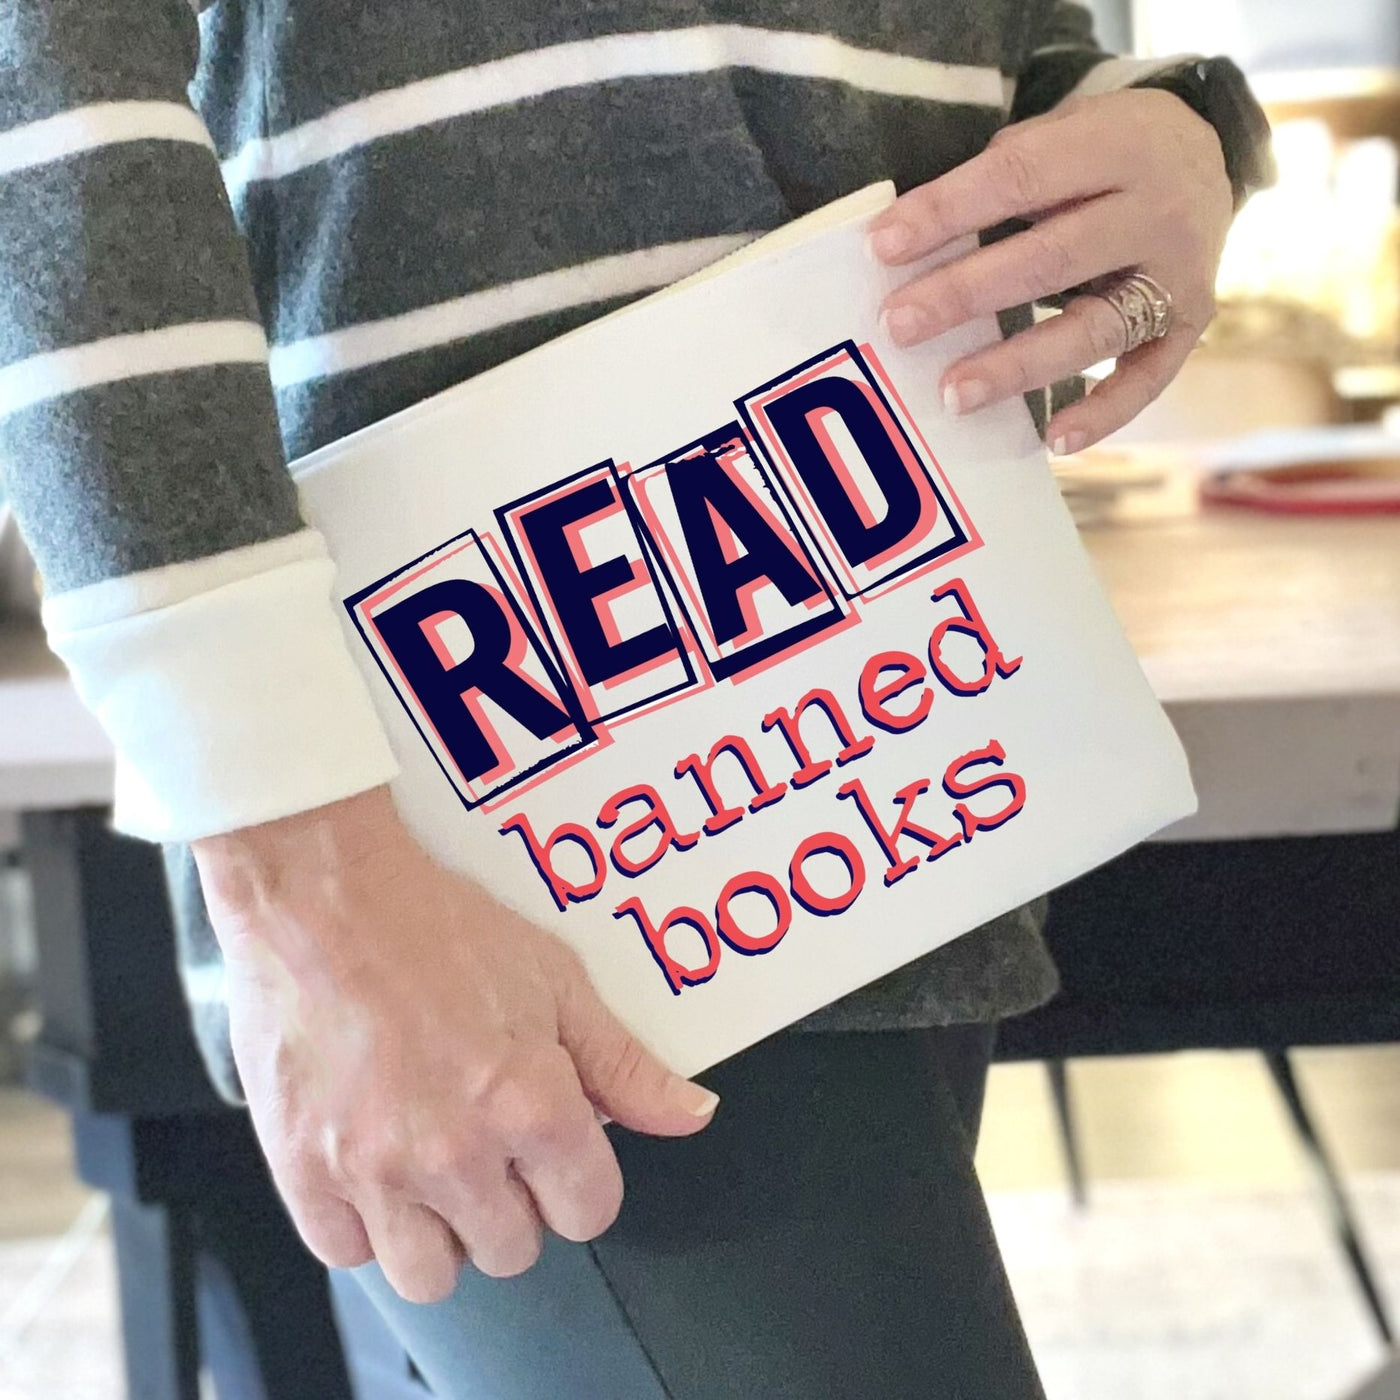 read banned books - canvas zip bag